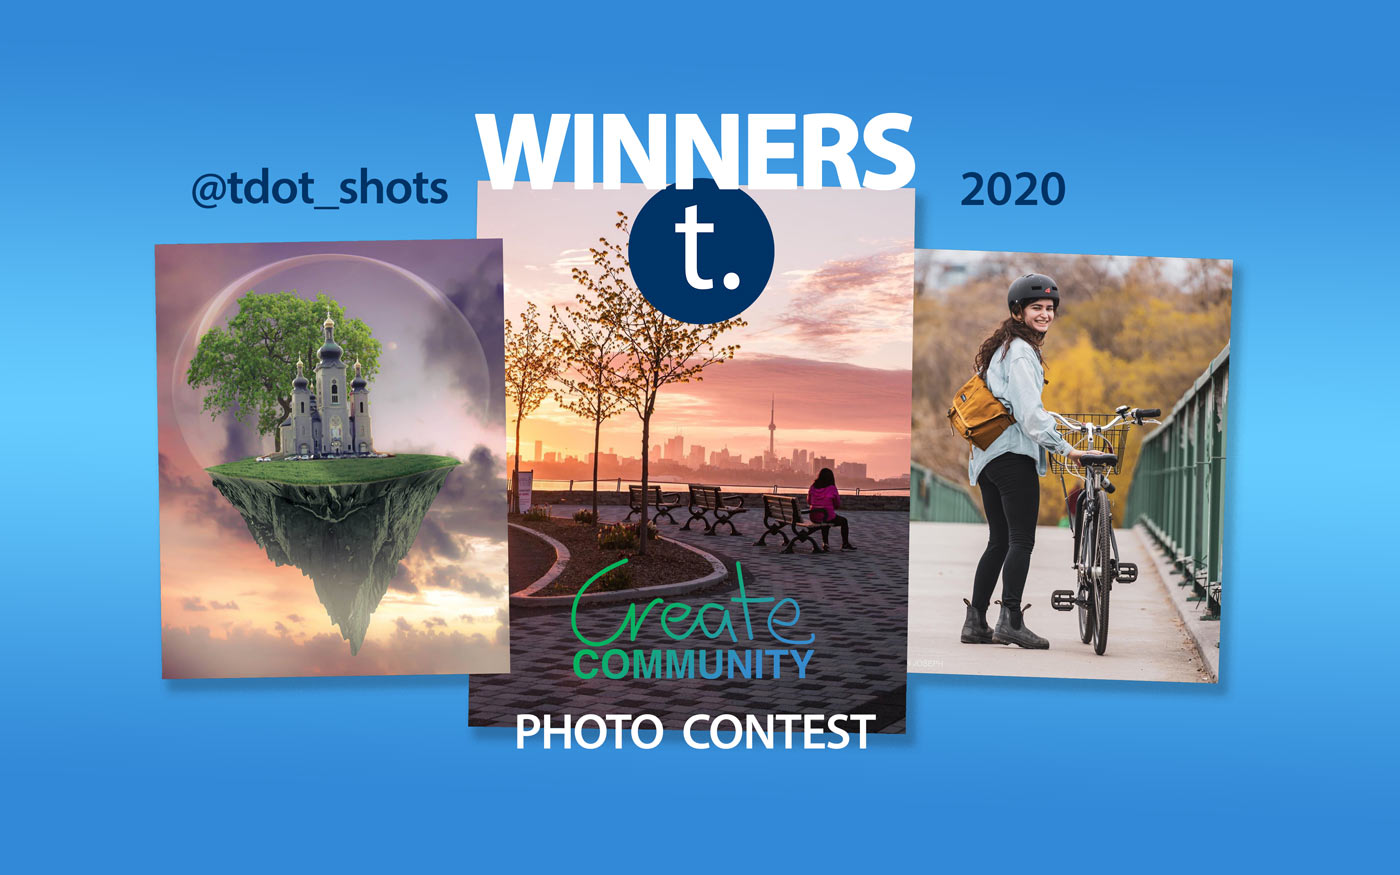 Tdot Shots Toronto Photo Contest Awards 2020 (View Gallery and Critique)